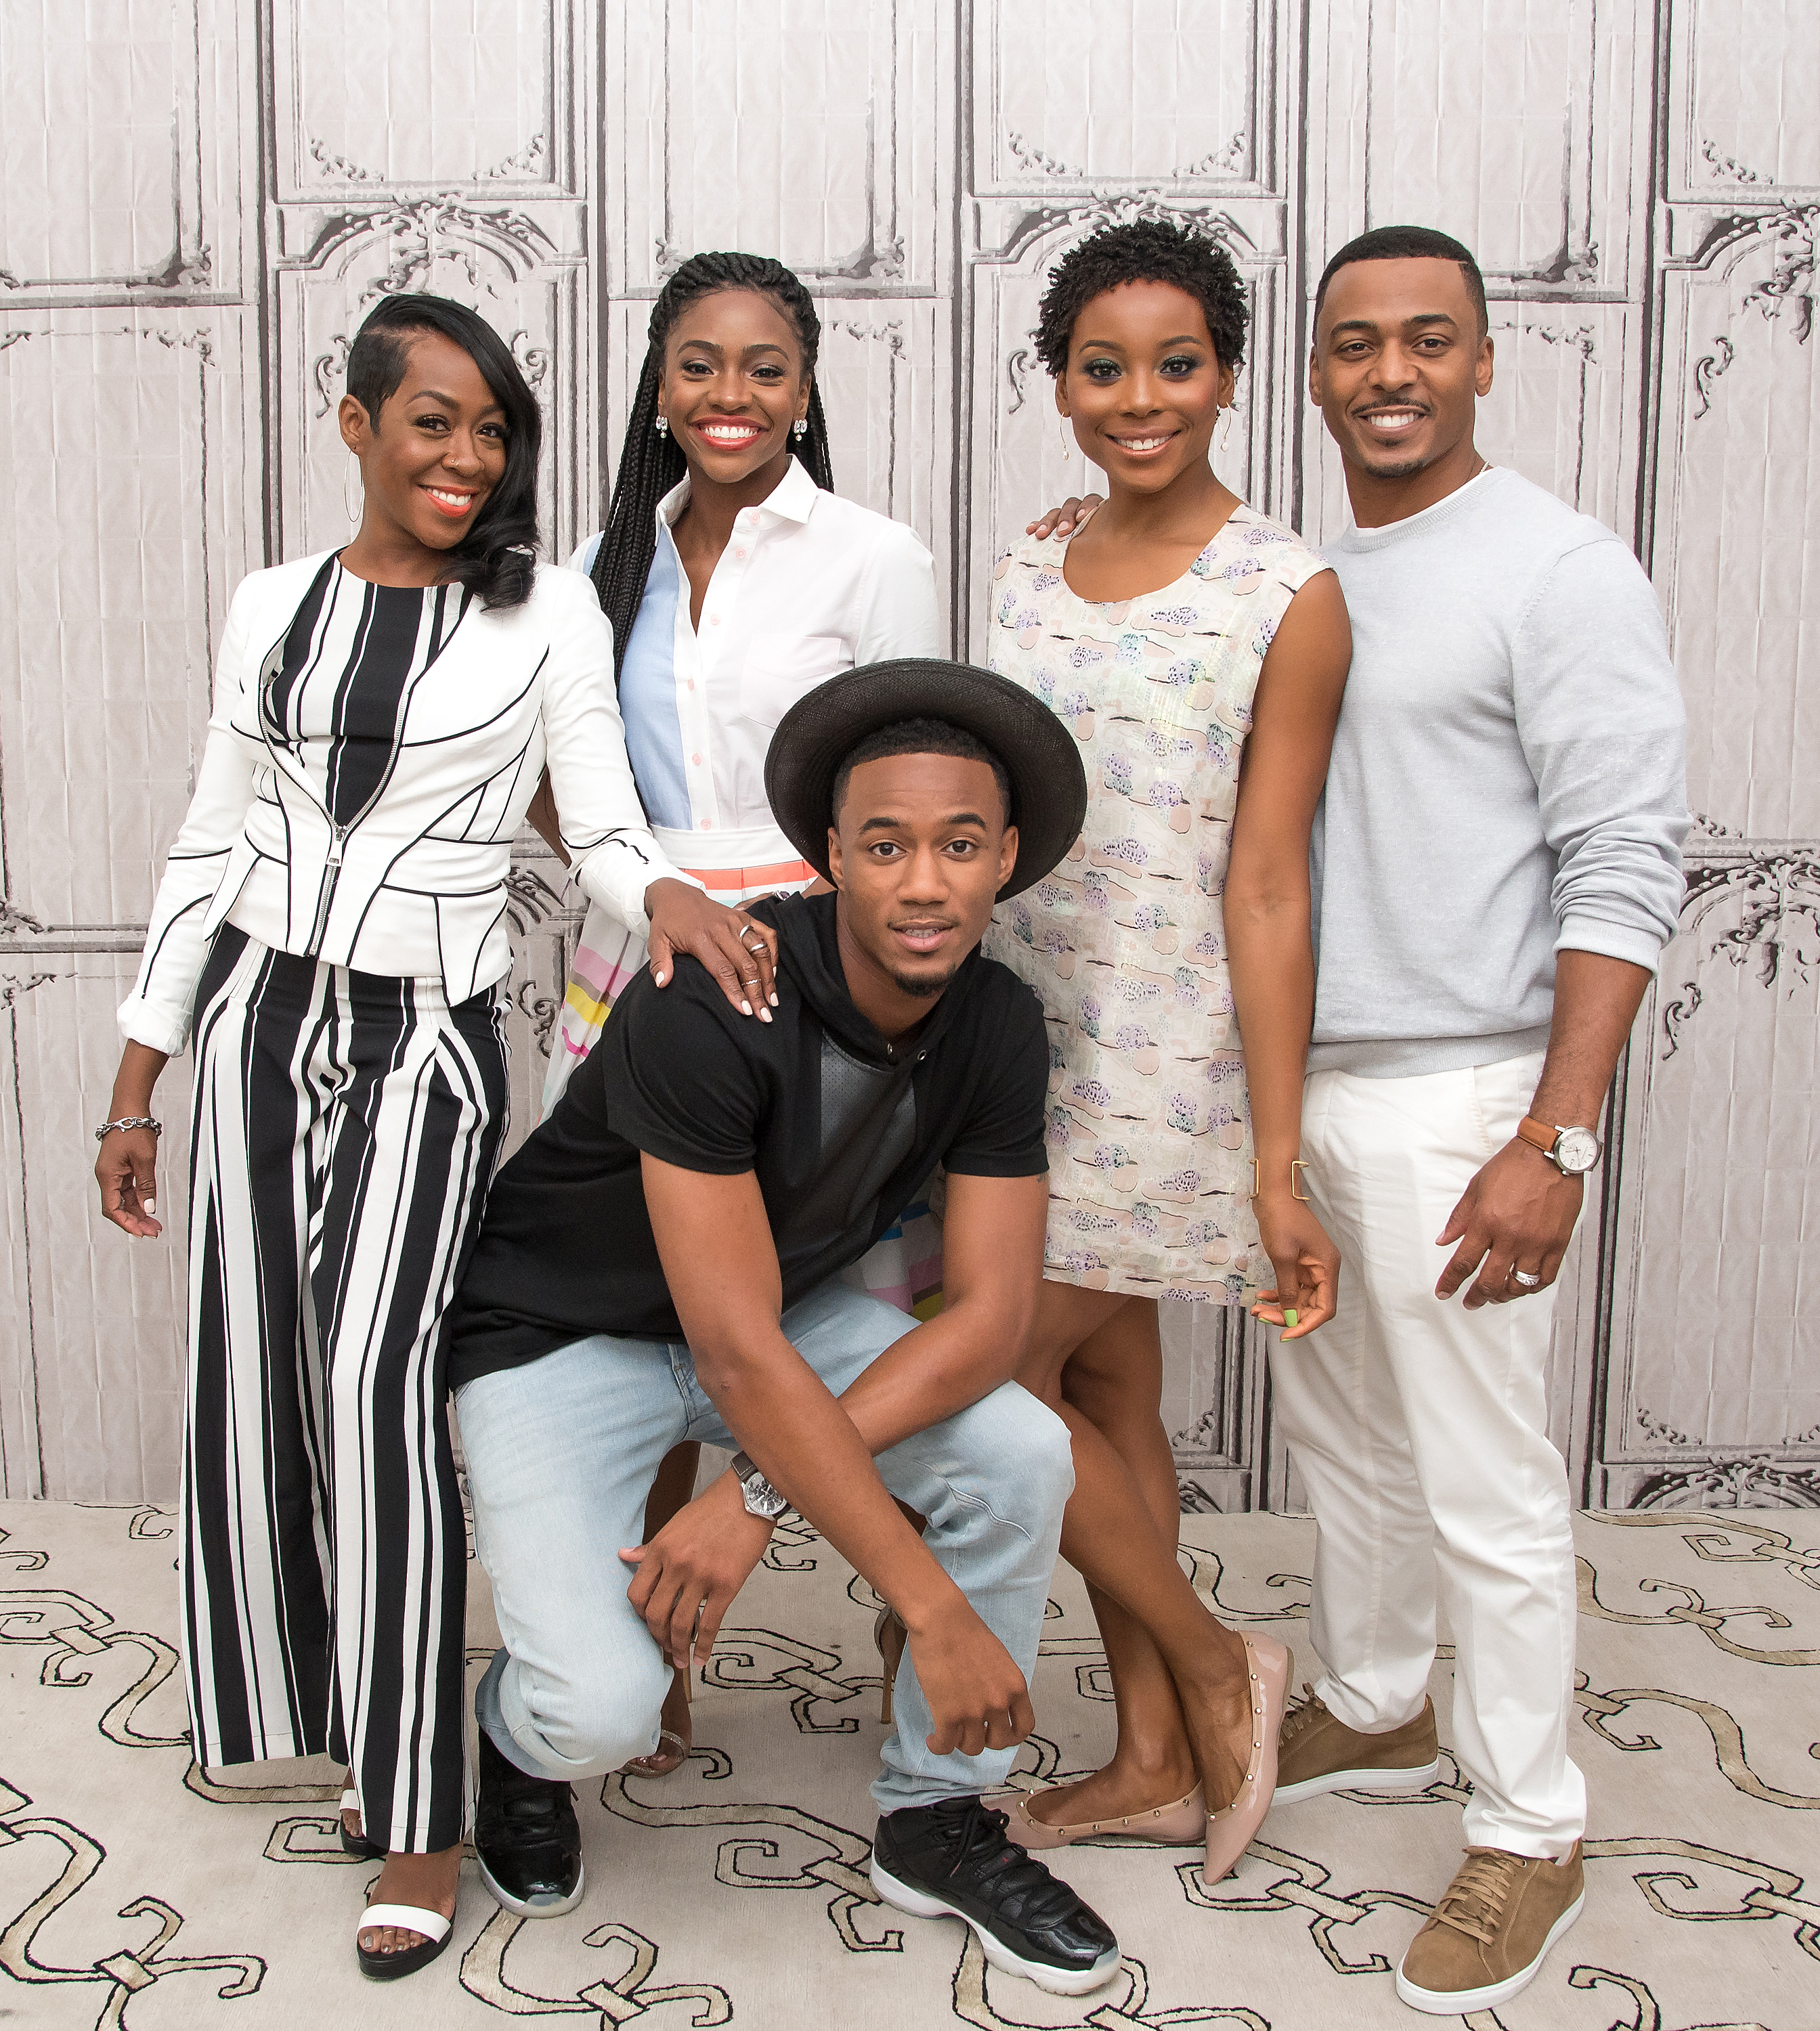 Tichina Arnold, Teyonah Parris, Jessie T. Usher, Erica Ash, and RonReaco Lee attend the AOL Build Speaker Series to discuss Survivor’s Remorse in 2016